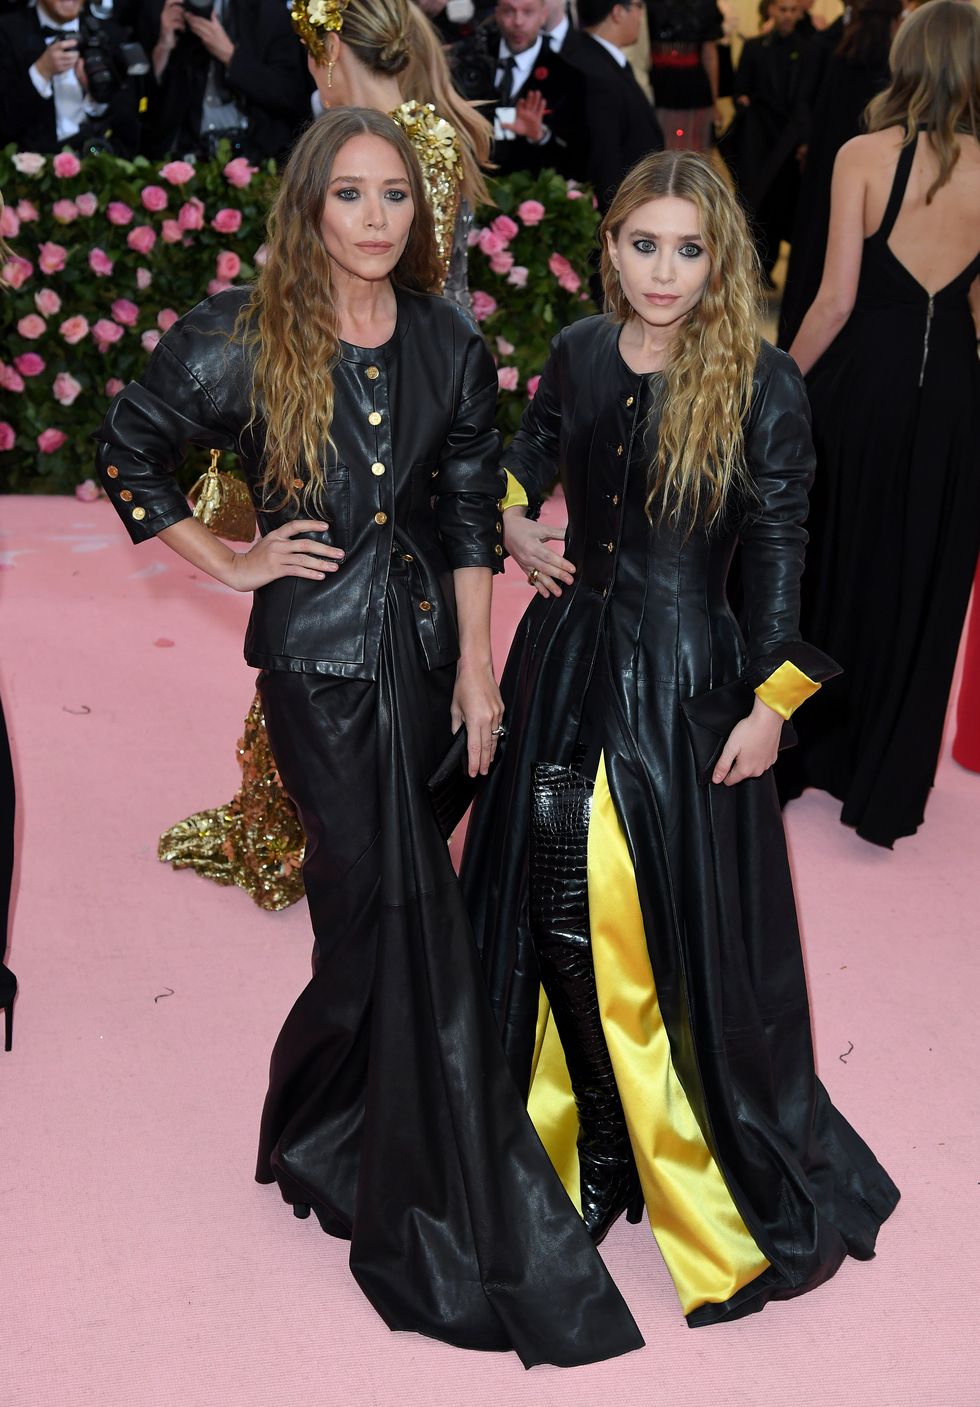 elizabeth olsen mary kate and ashley olsen competed for her affection